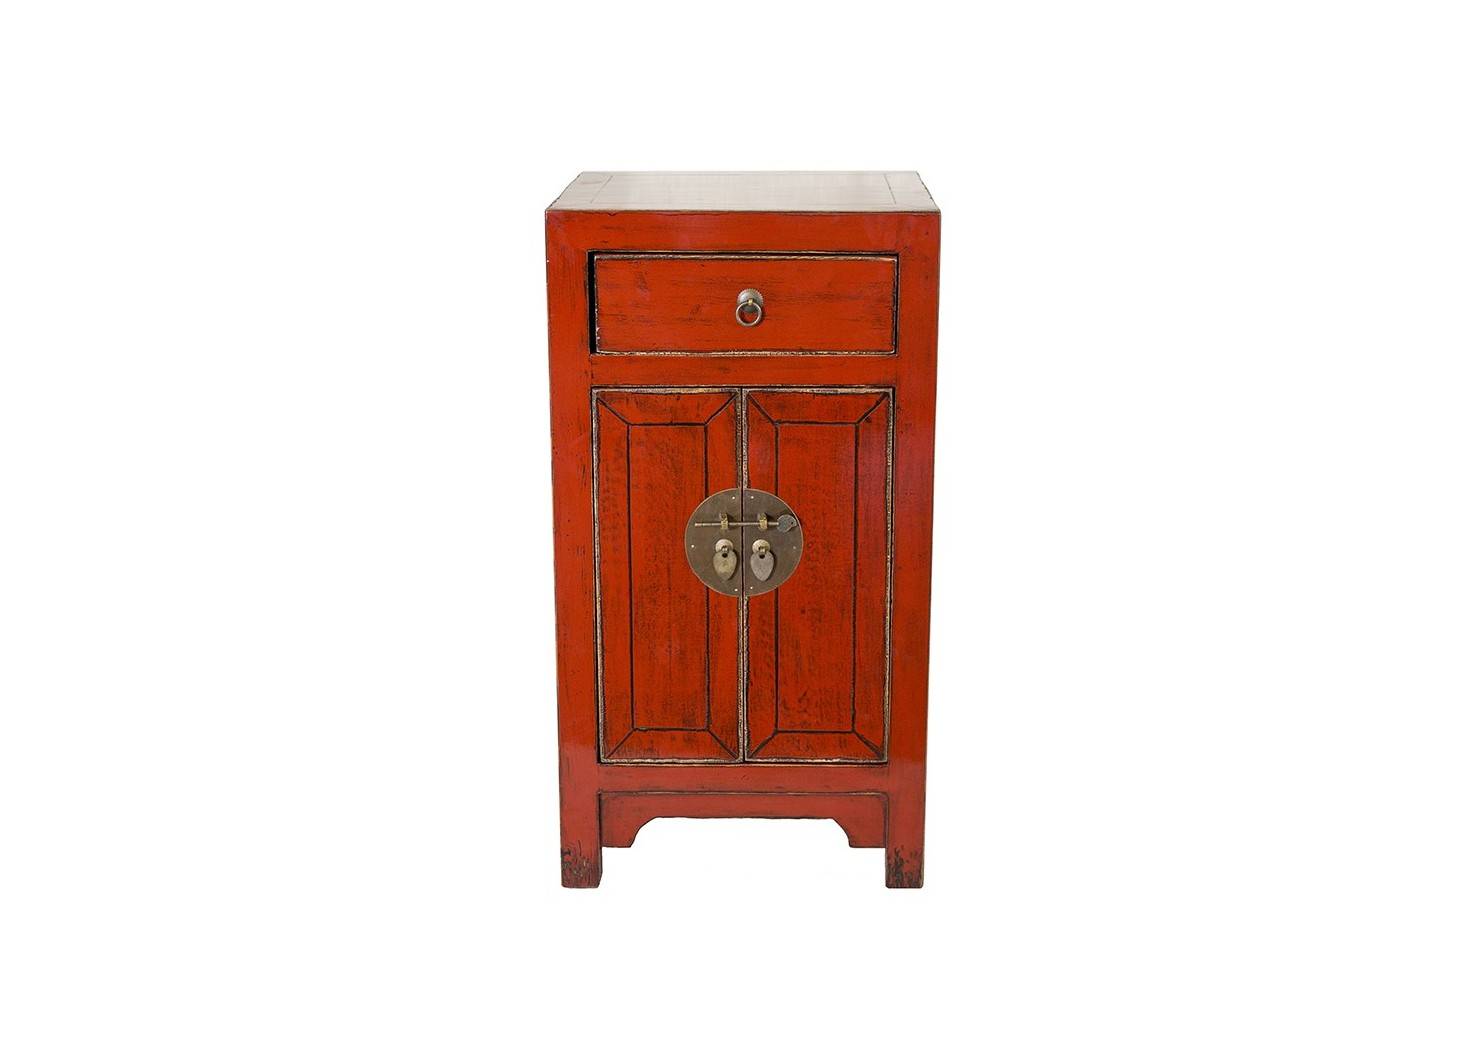 Chinese sideboard - 2 doors 1 drawer - Red